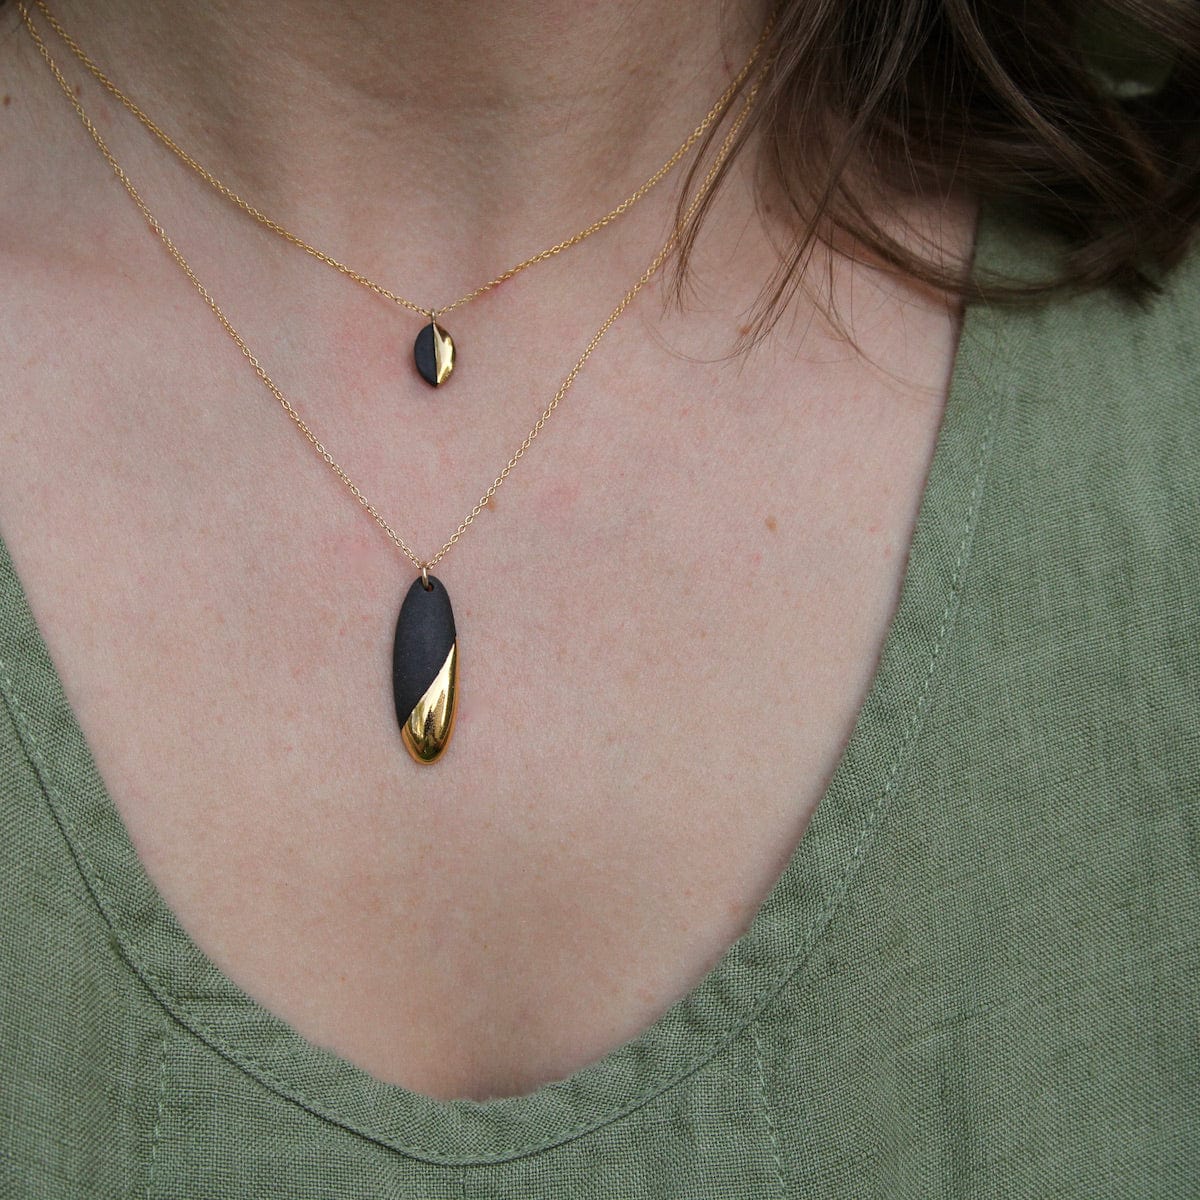 NKL-GF Gold Dipped Long Oval Necklace - Black